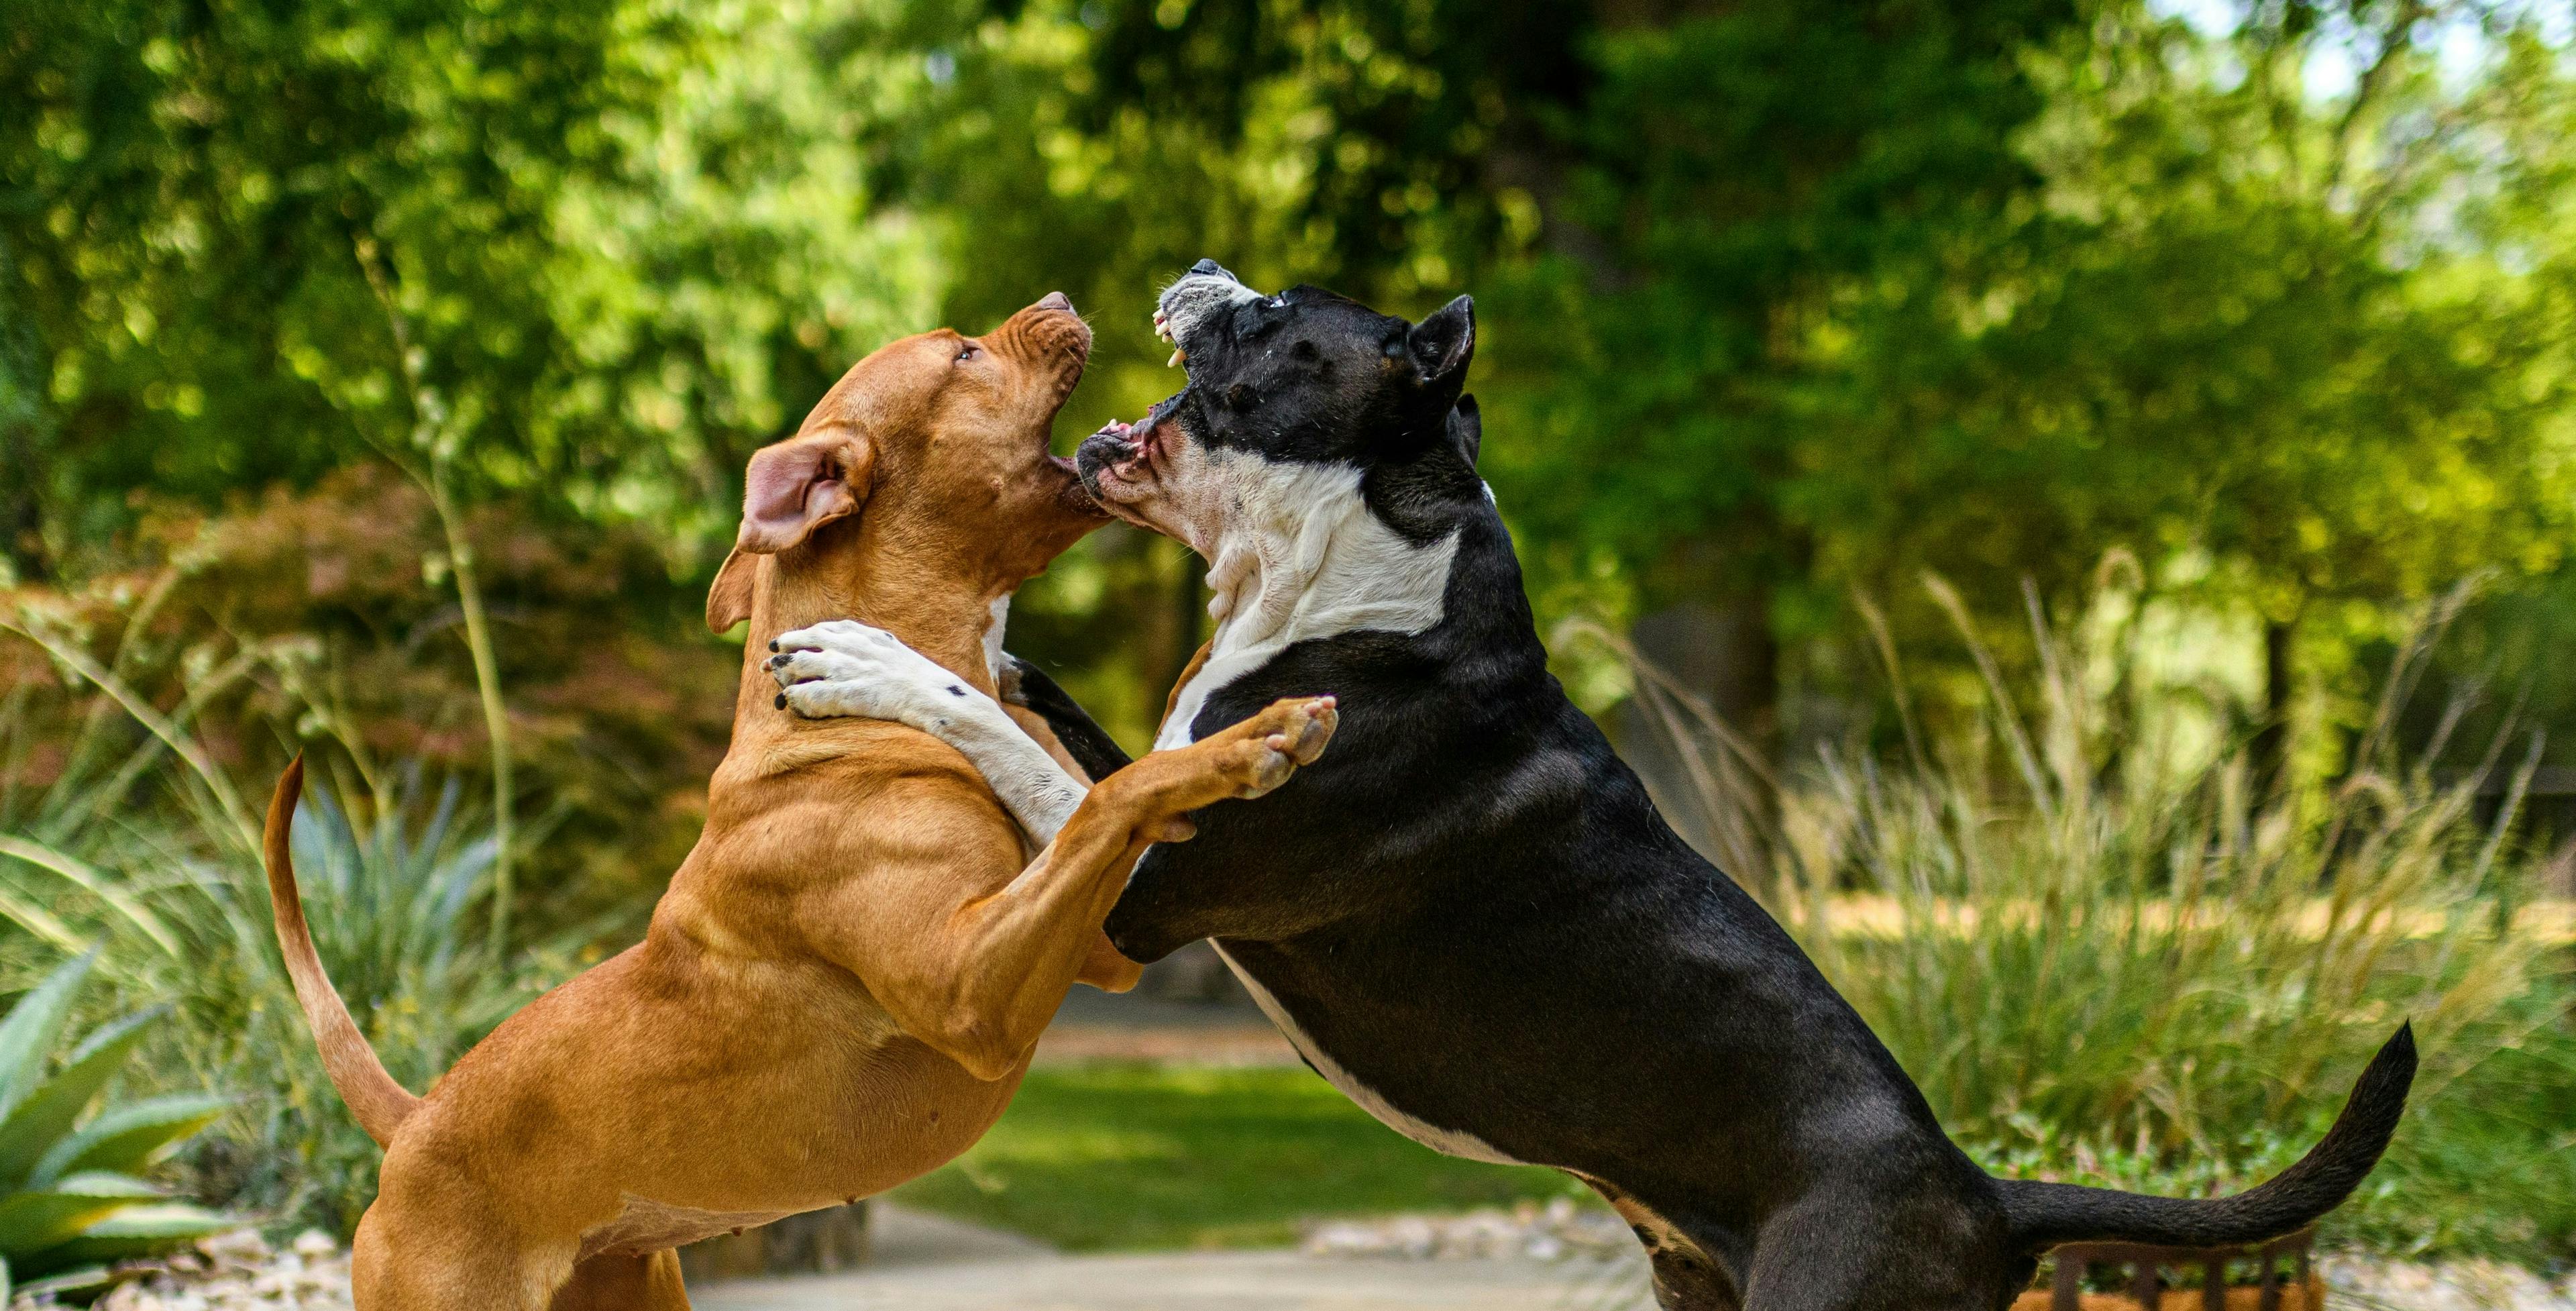 How to Break up a Dog Fight